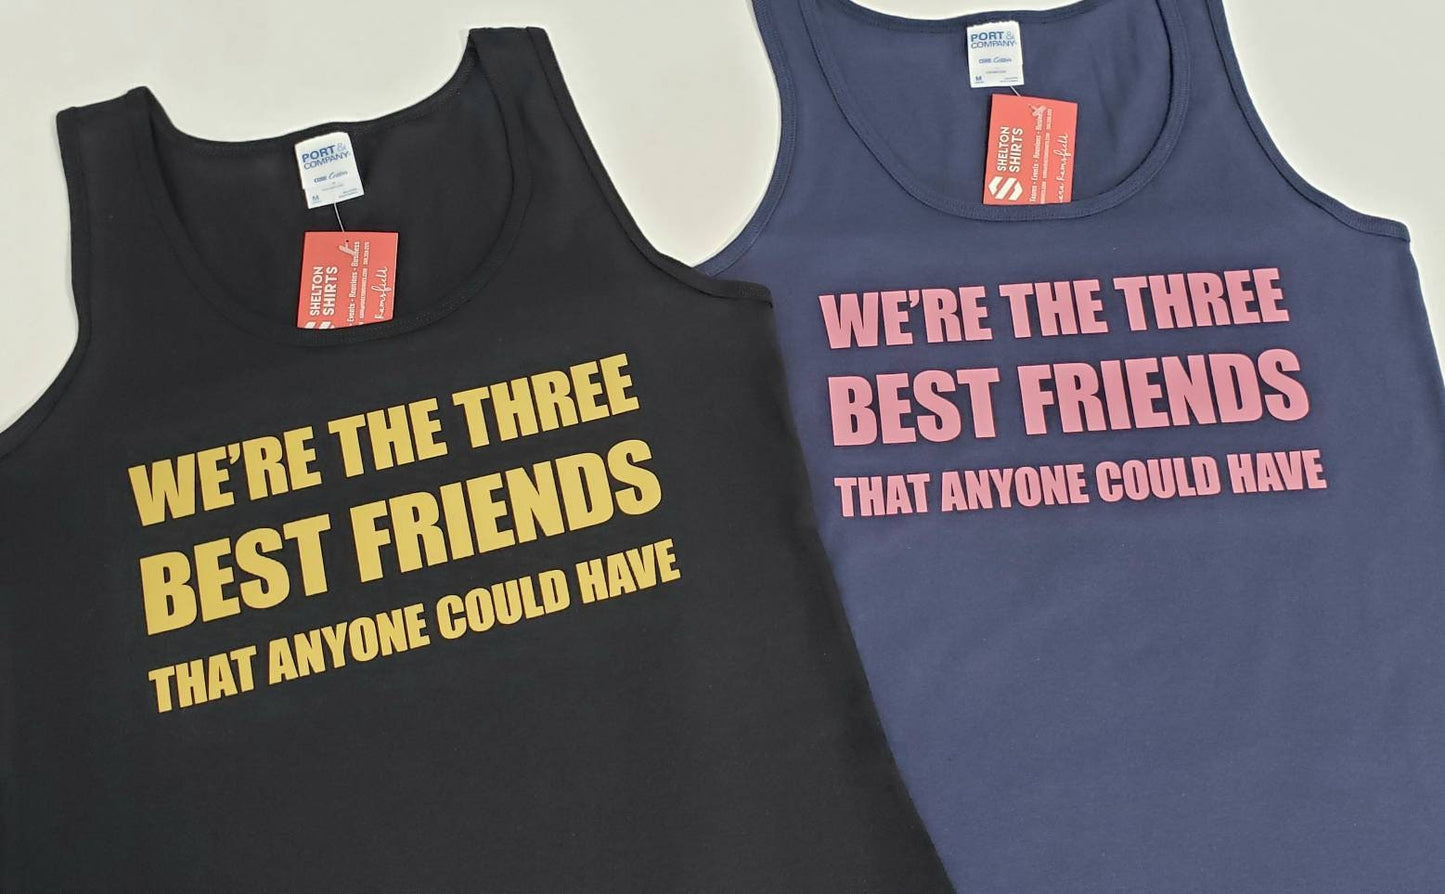 We're The Three Best Friends That Anyone Could Have Tanks or Shirts - The Hangover Movie Quote